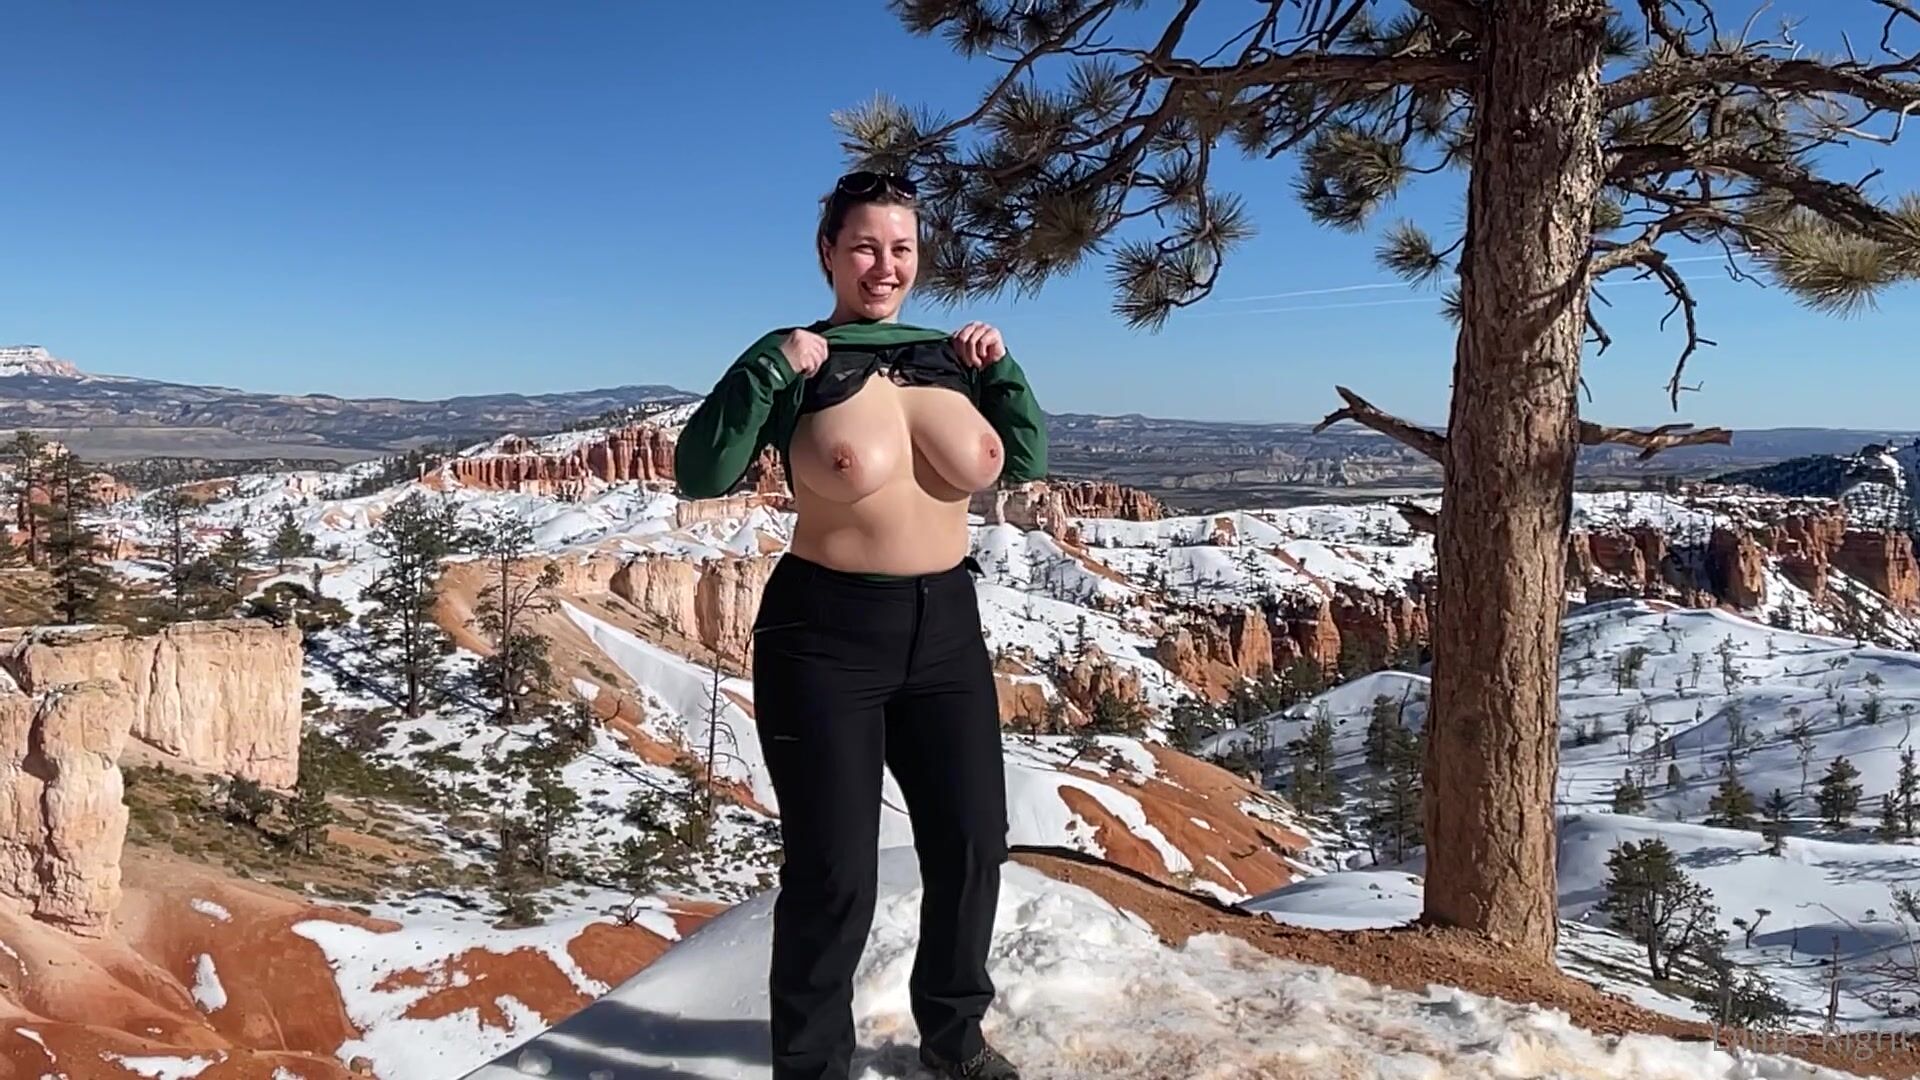 Lilliasright who wanted some utah titty drop action cuz im just dumpin out left picture